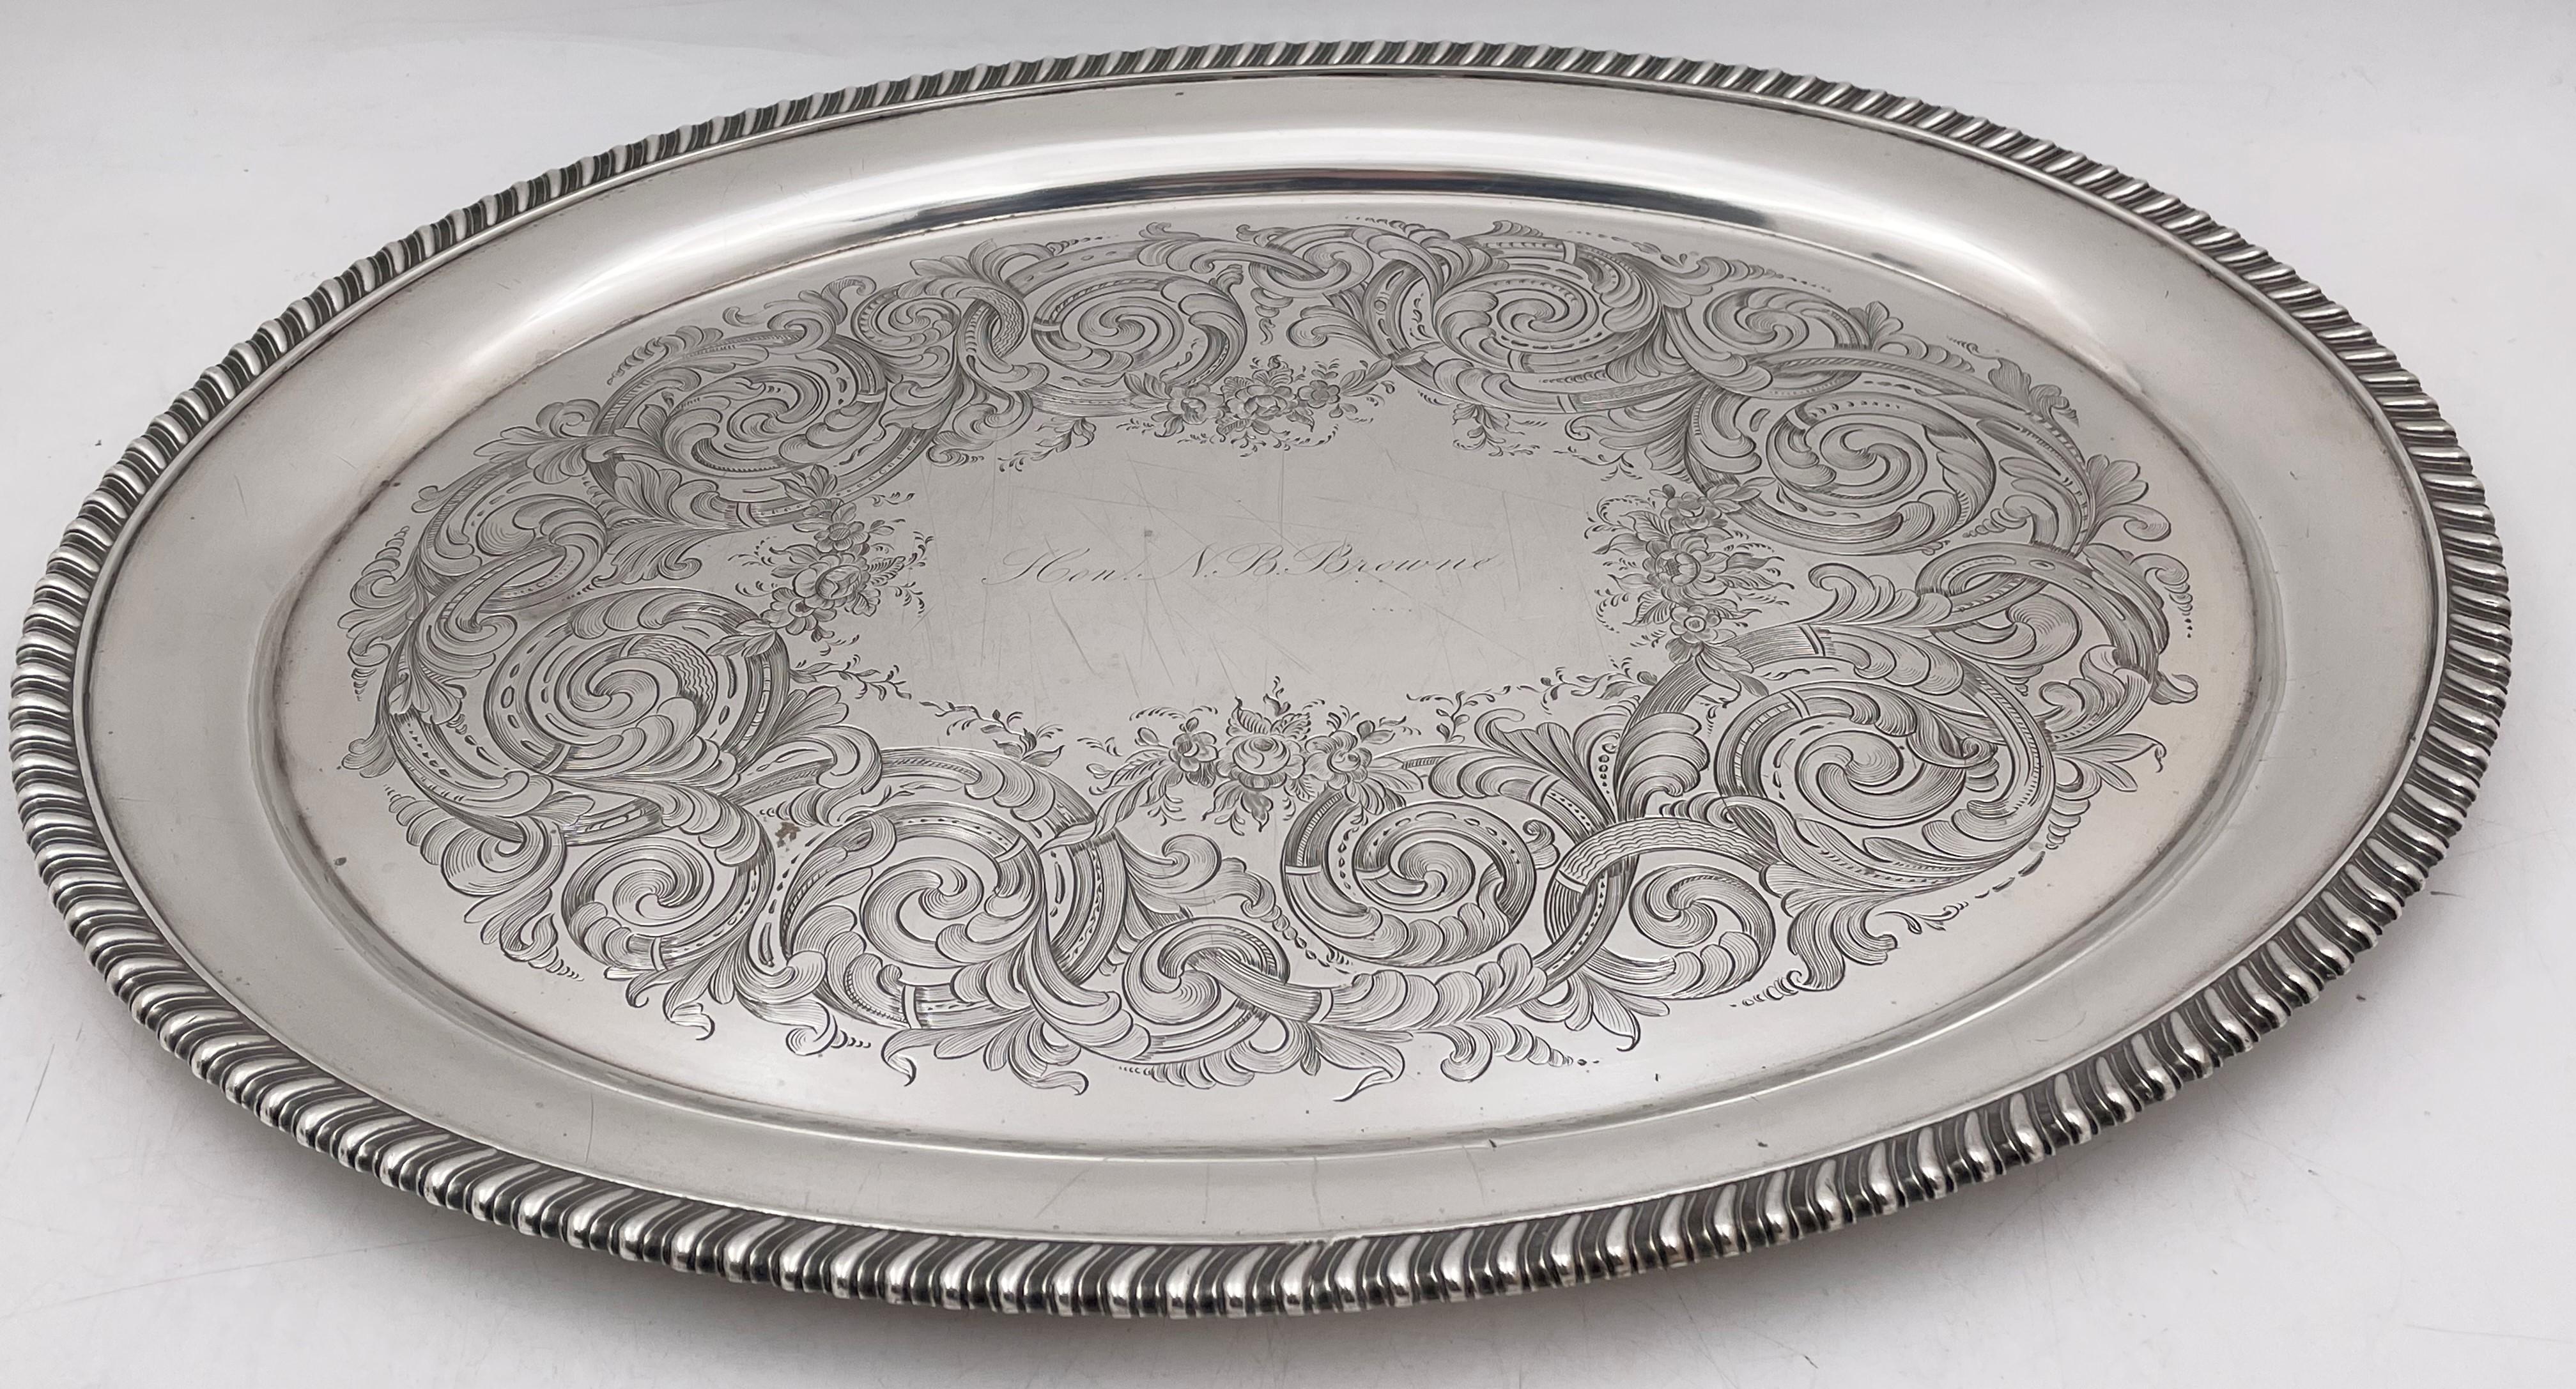 Robert and William Wilson, silver platter or tray, from the mid-19th century, with a gadrooned rim and exquisitely engraved foliate motifs. It measures 17 1/2'' in length by 13 1/4'' in width by 7/8'' in height, weighs 49.8 troy ounces and bears